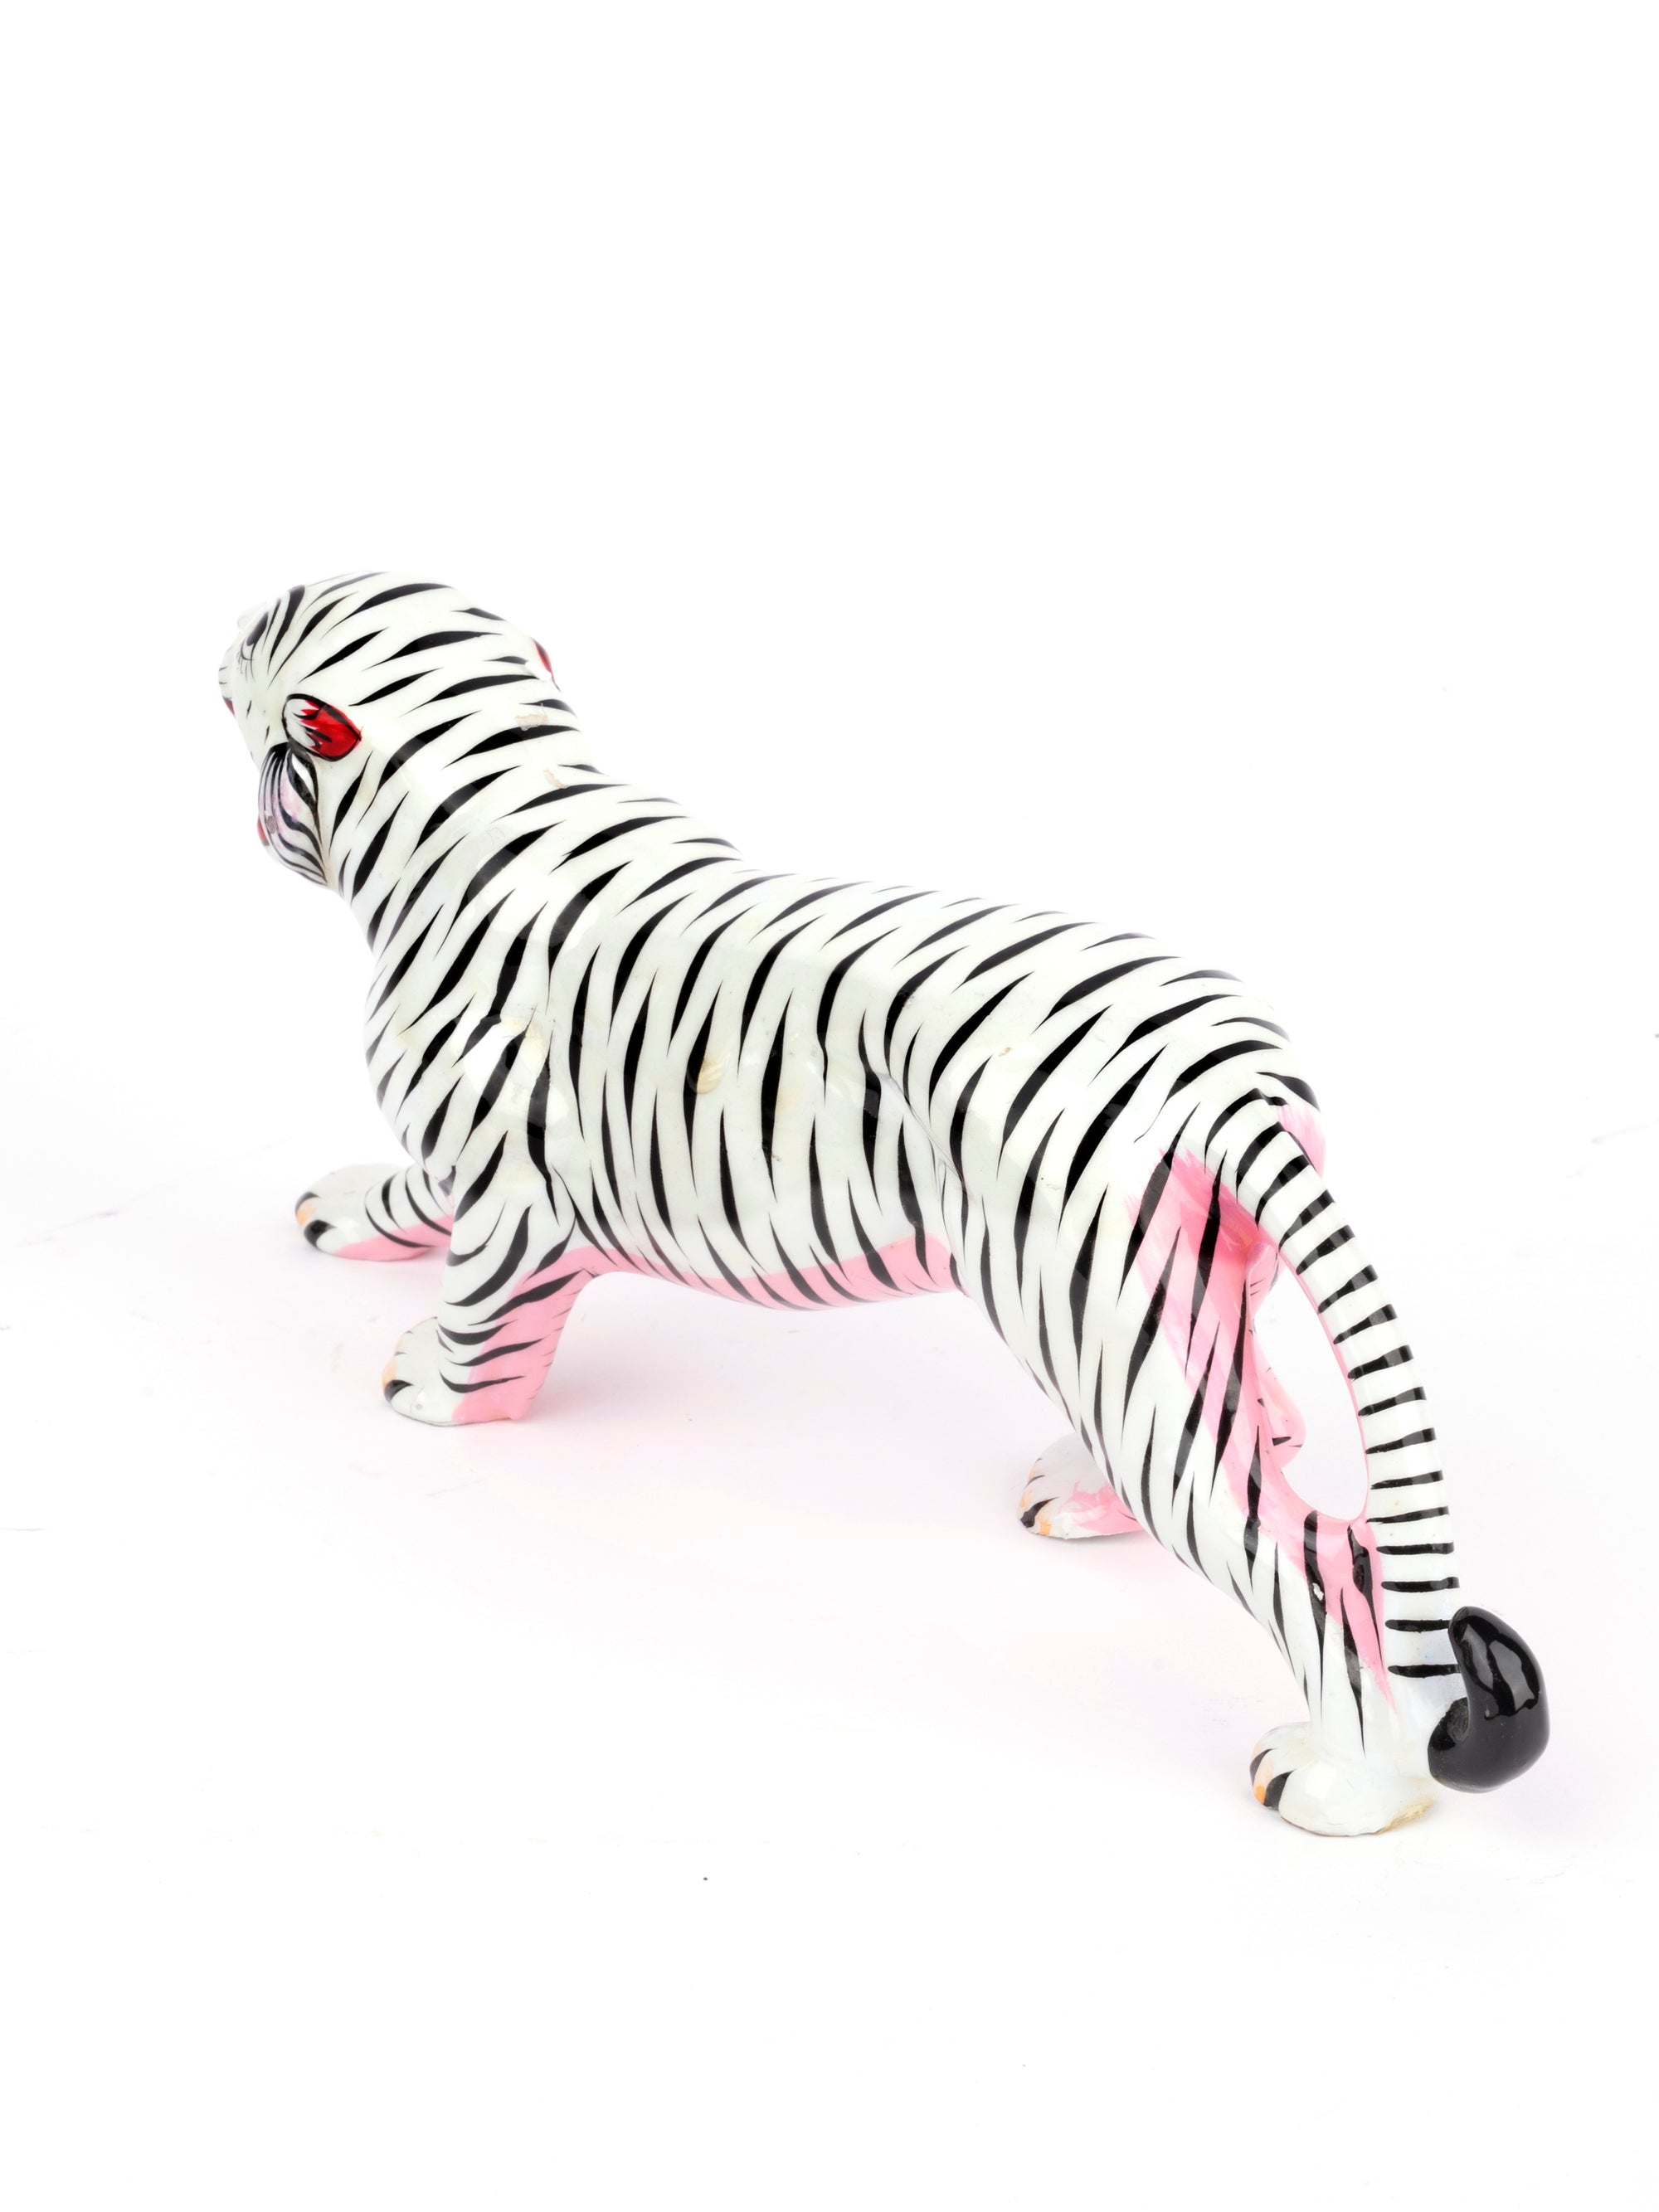 White Metal Tiger Figurine for Home Office Decor, 9 inches long - The Heritage Artifacts